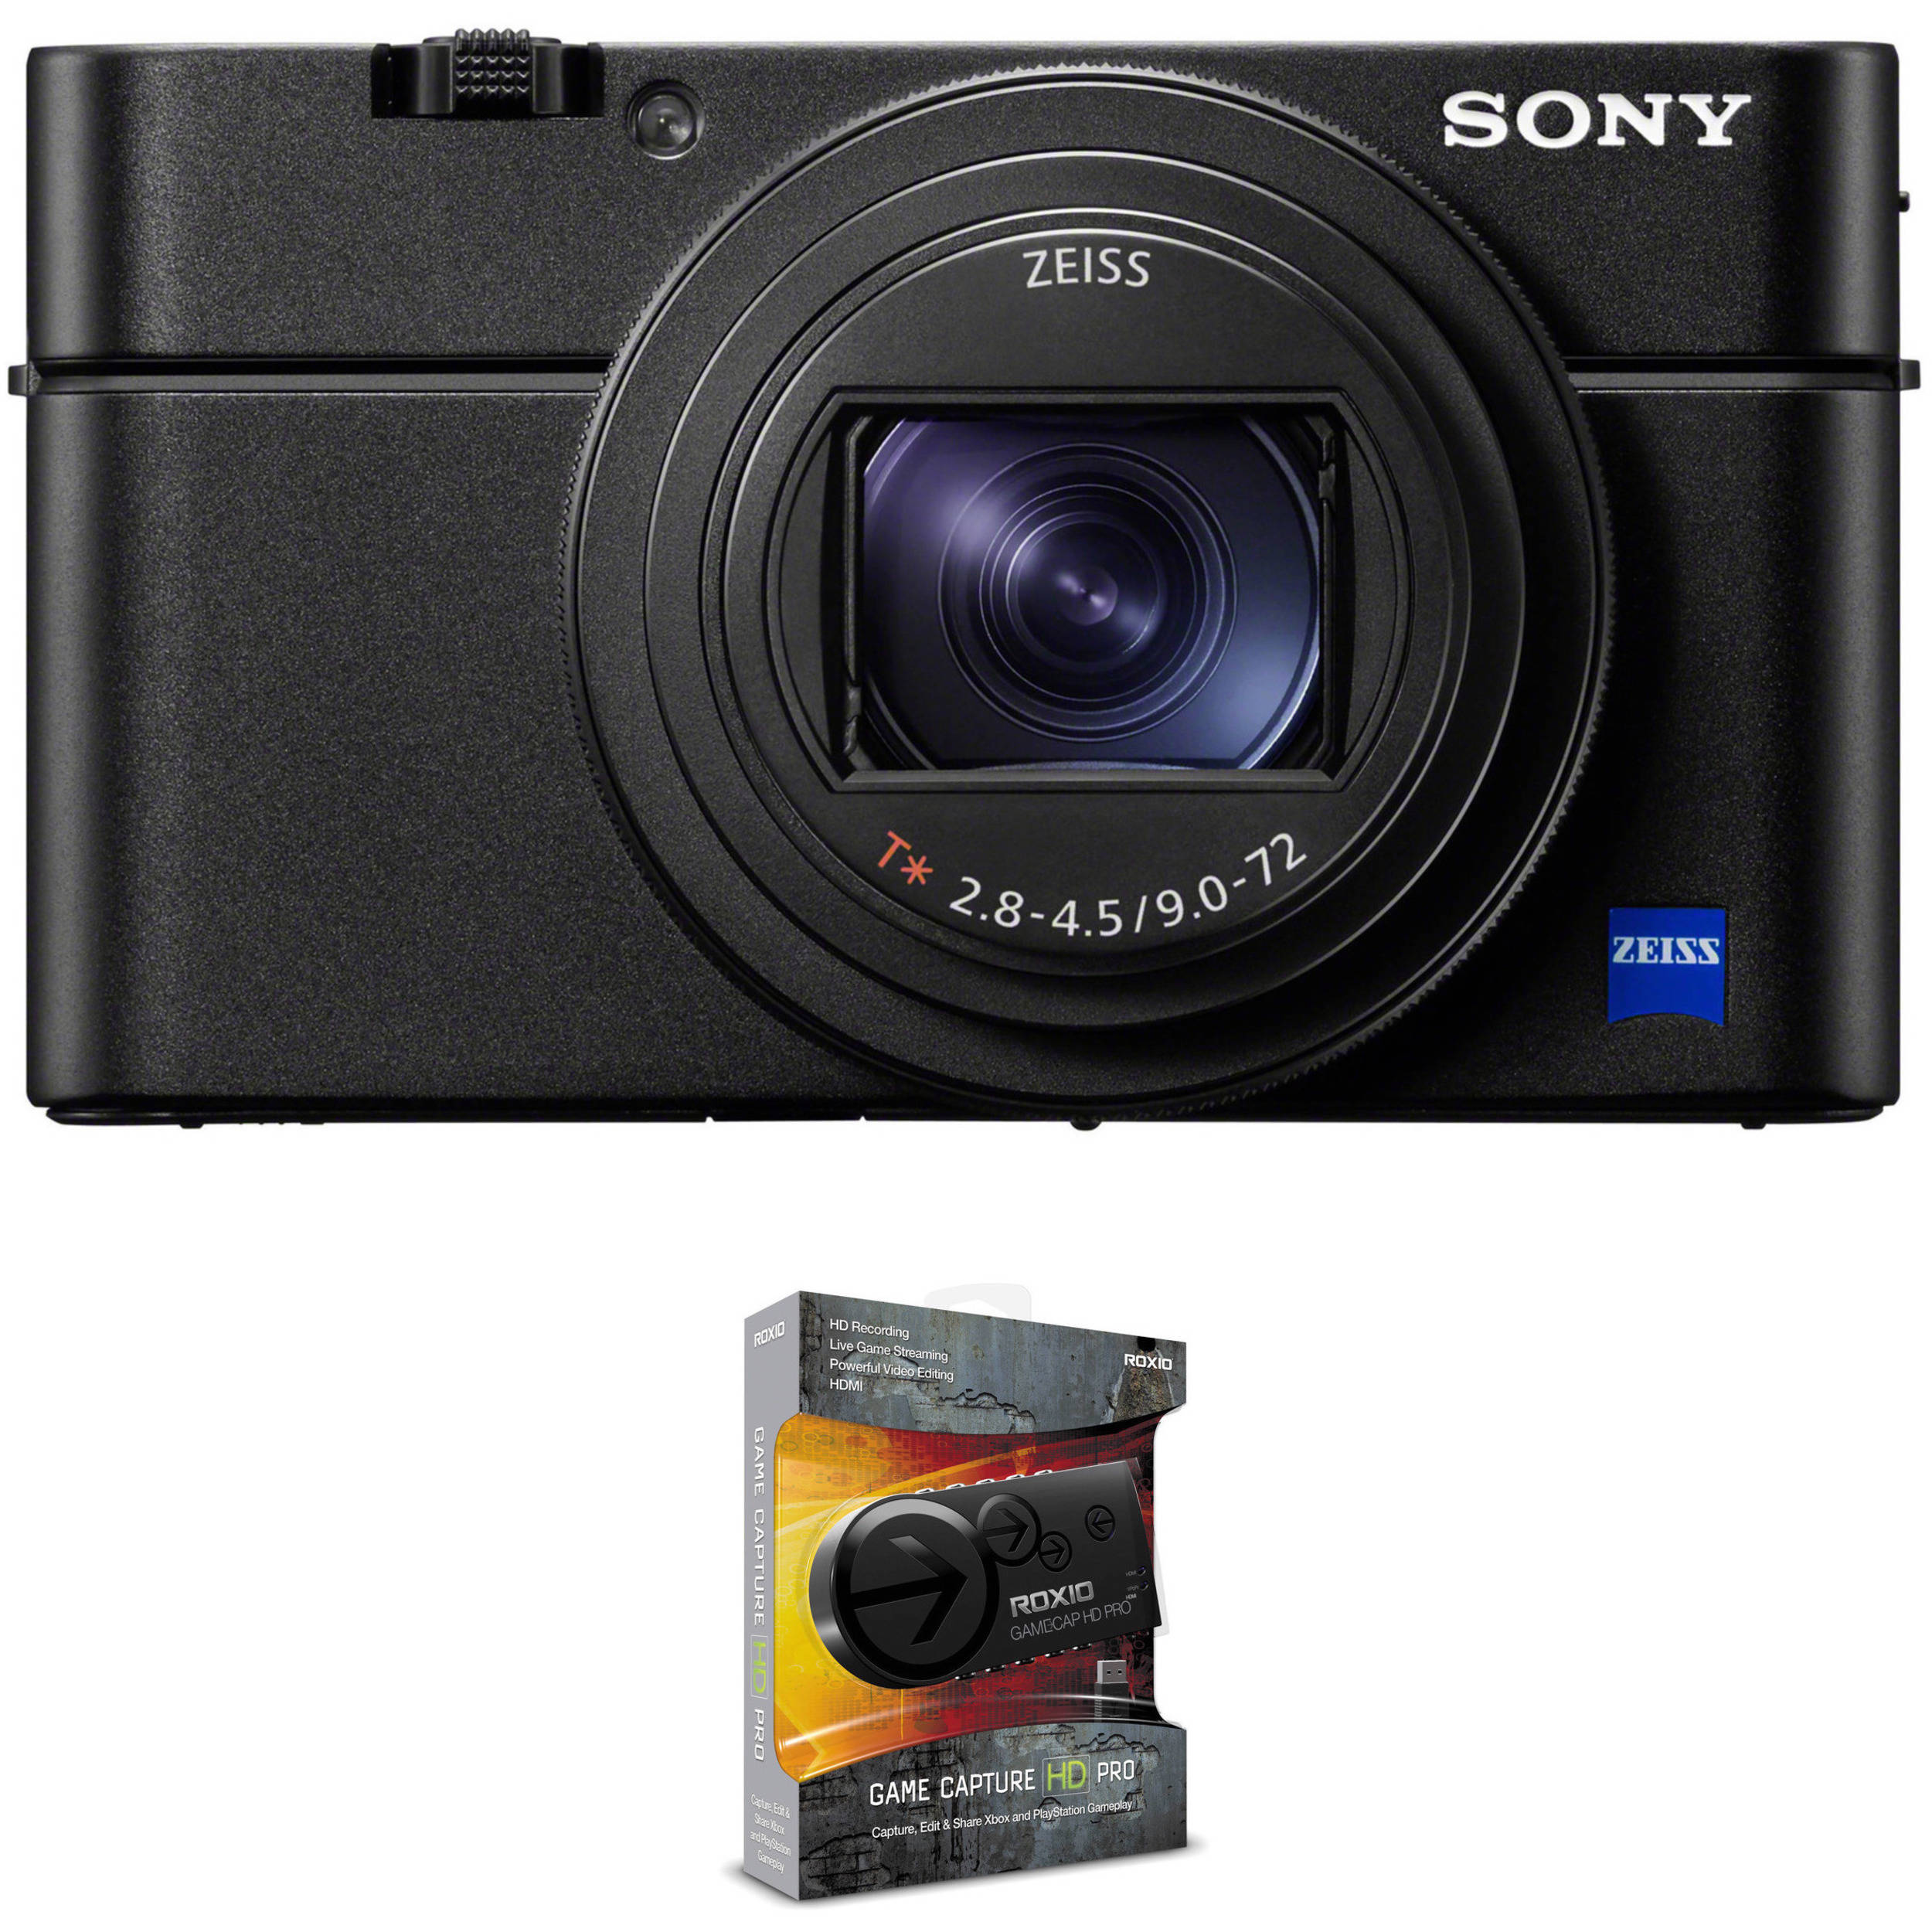 Sony Cyber Shot Dsc Rx100 Vii Digital Camera With Capture Card